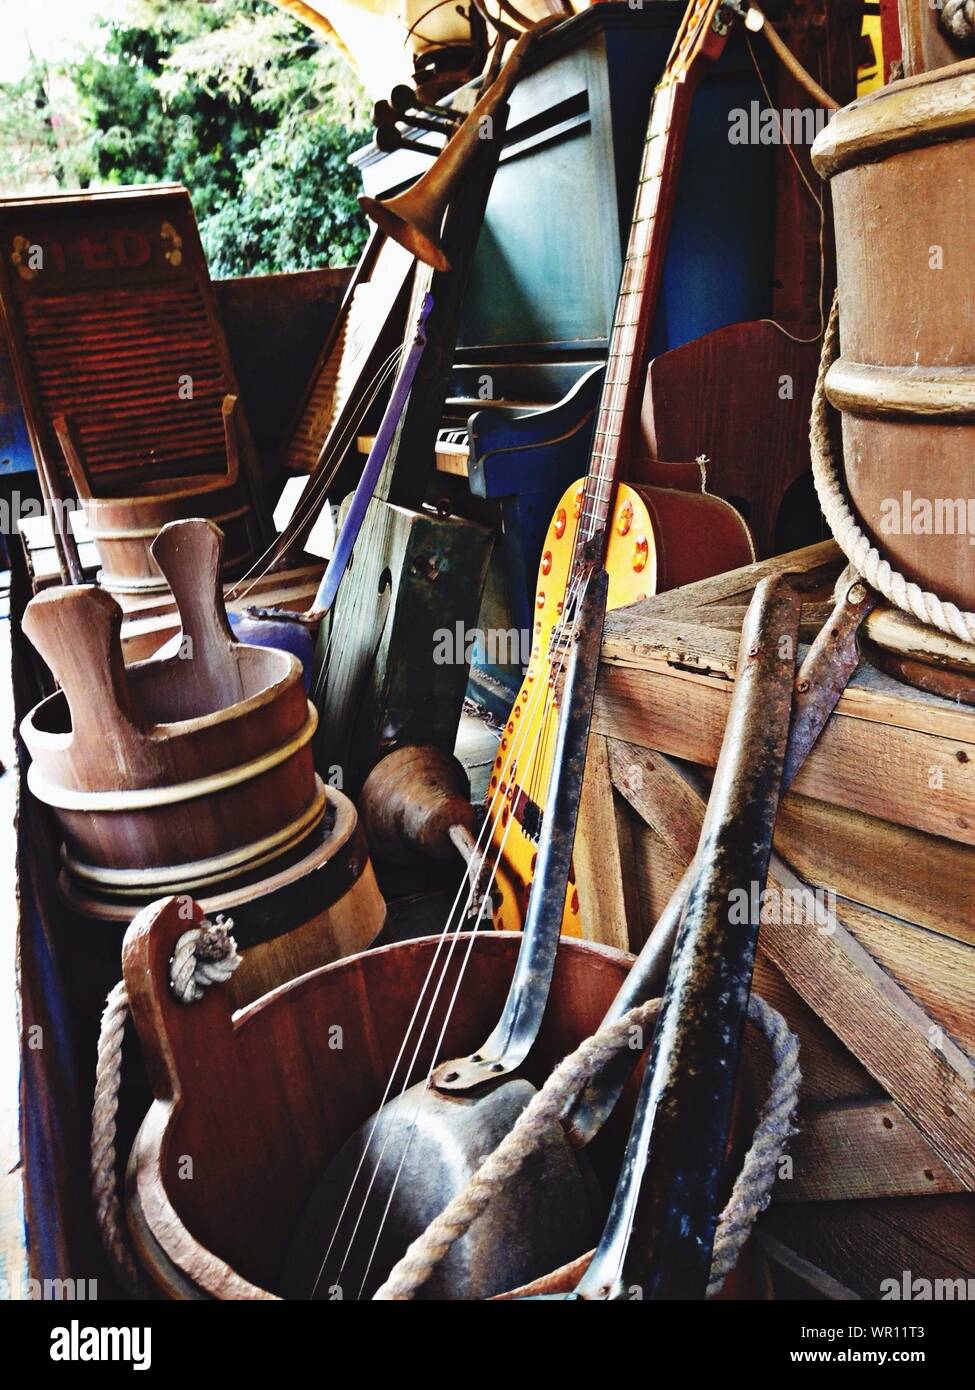 House Old Music Instruments Dumped Stock Photo